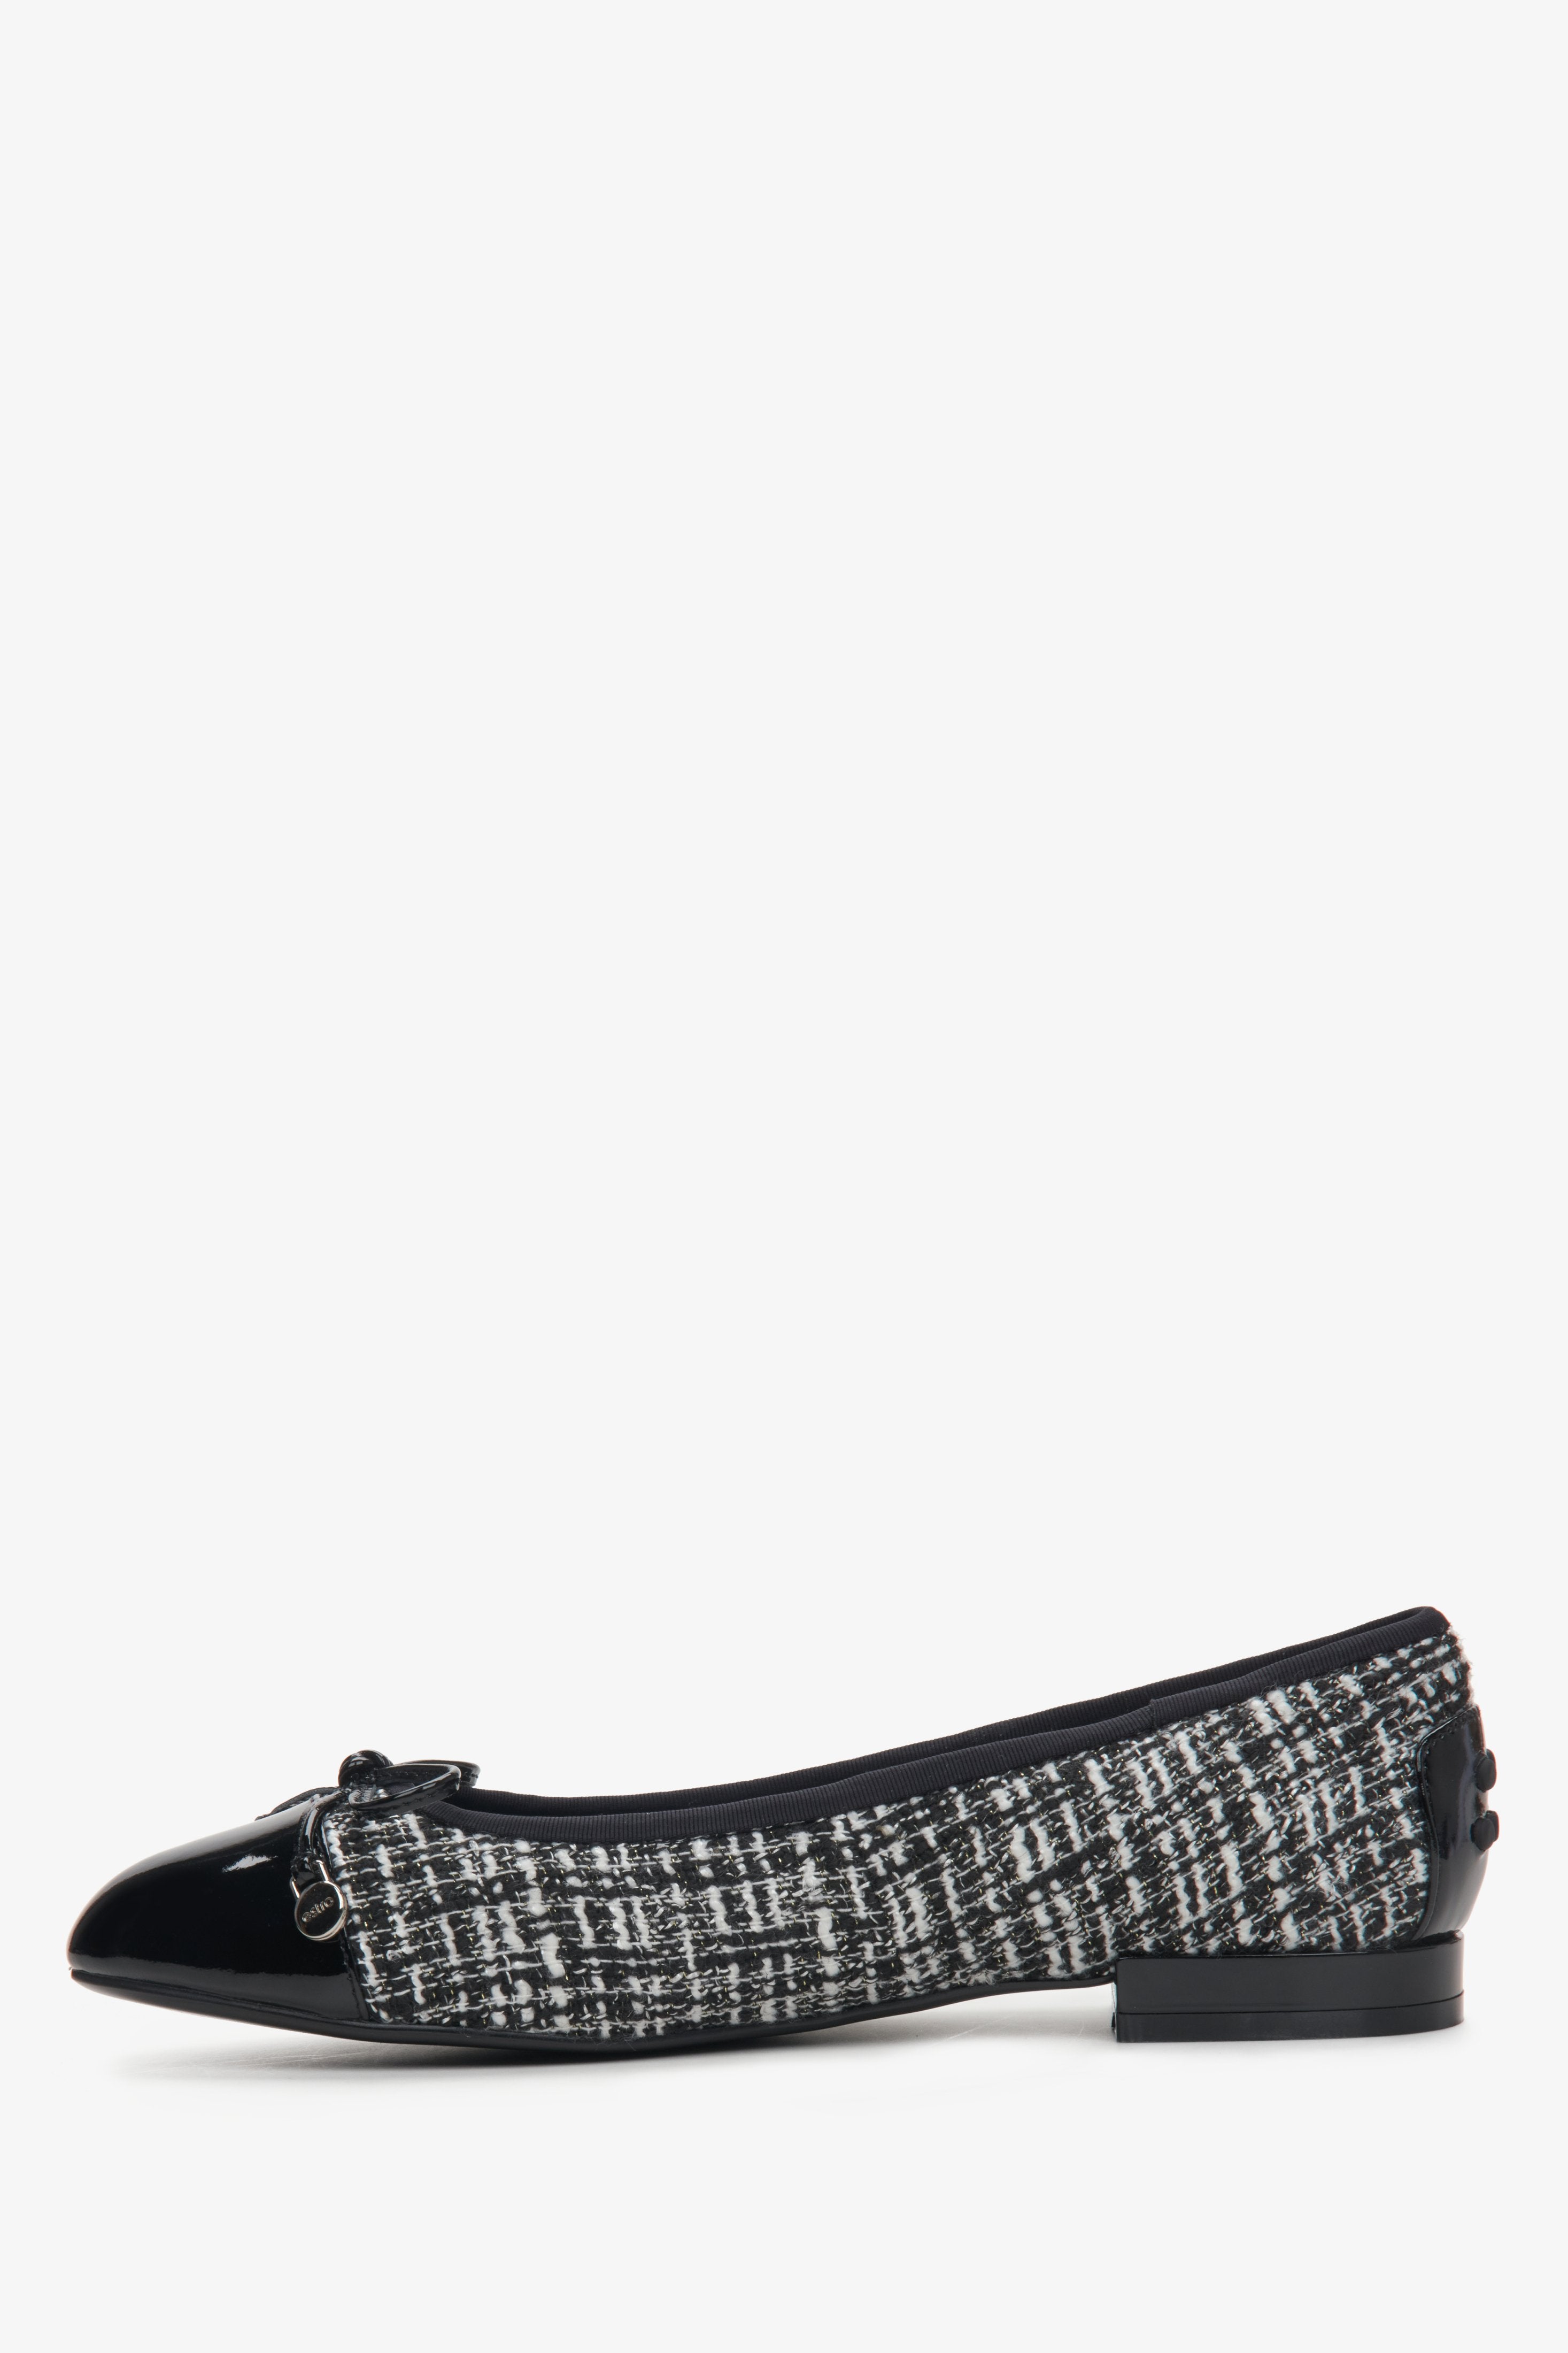 Women's ballet flats in black and white combined materials by Estro.